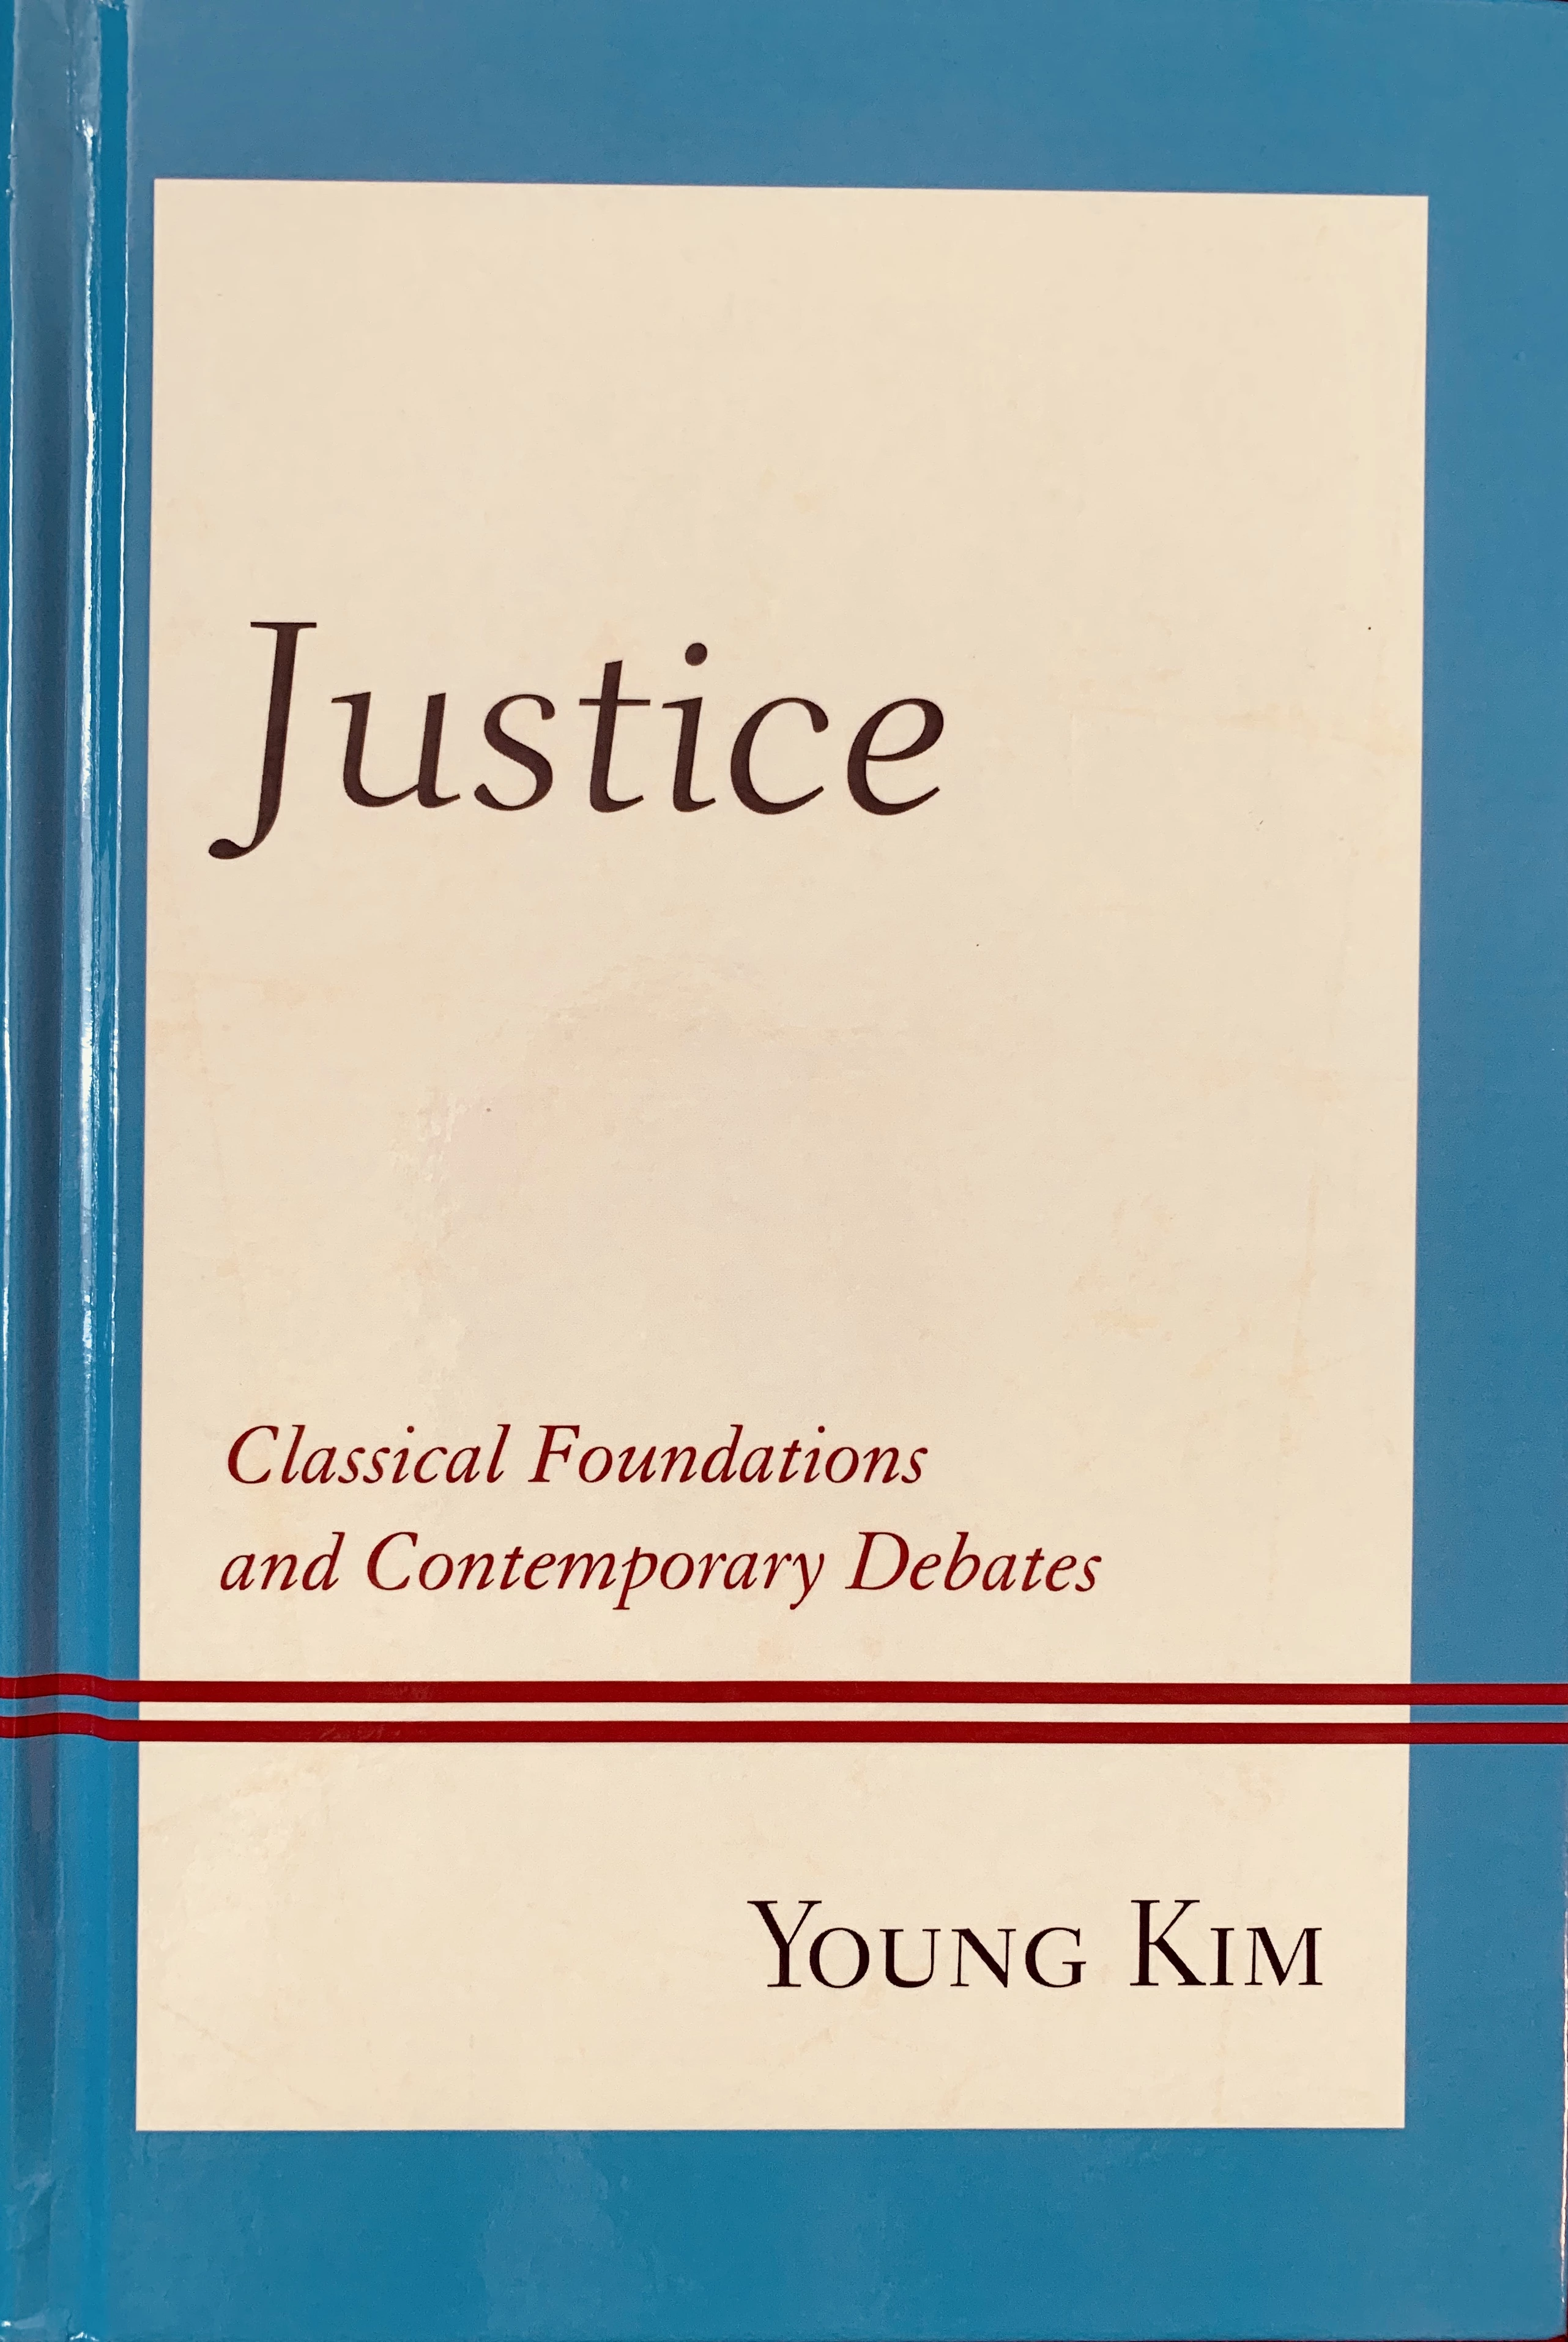 Cover of Young Kim's book in blue and beige